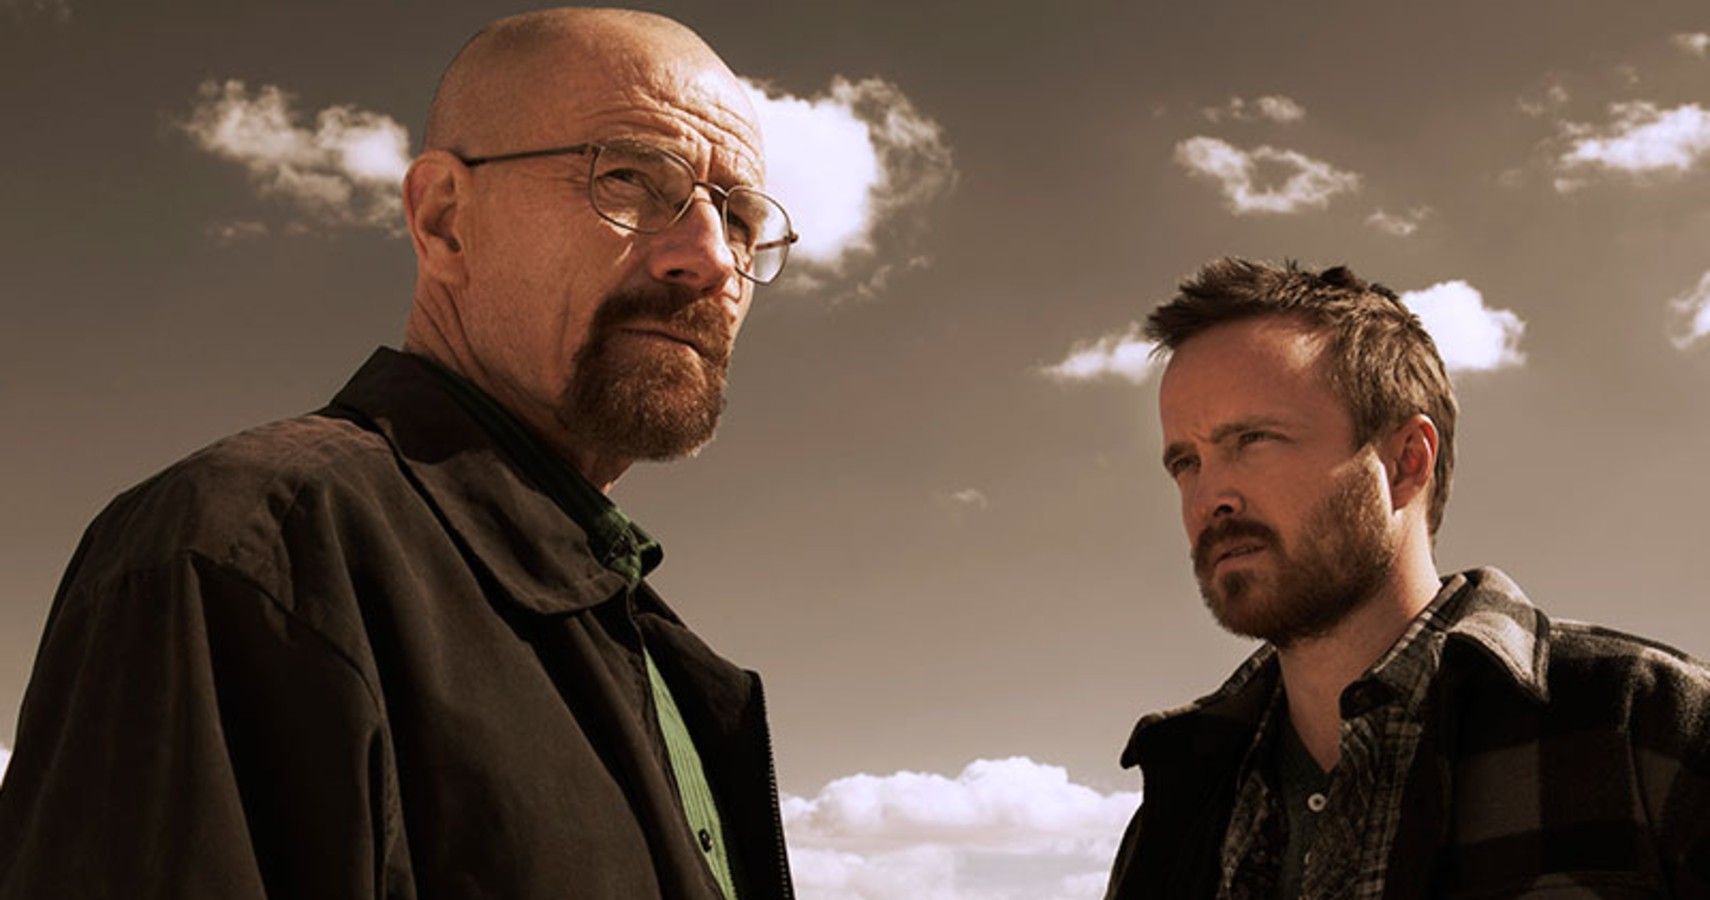 Breaking Bad The 5 Best Character Arcs (& 5 Characters That Stayed Mostly The Same)